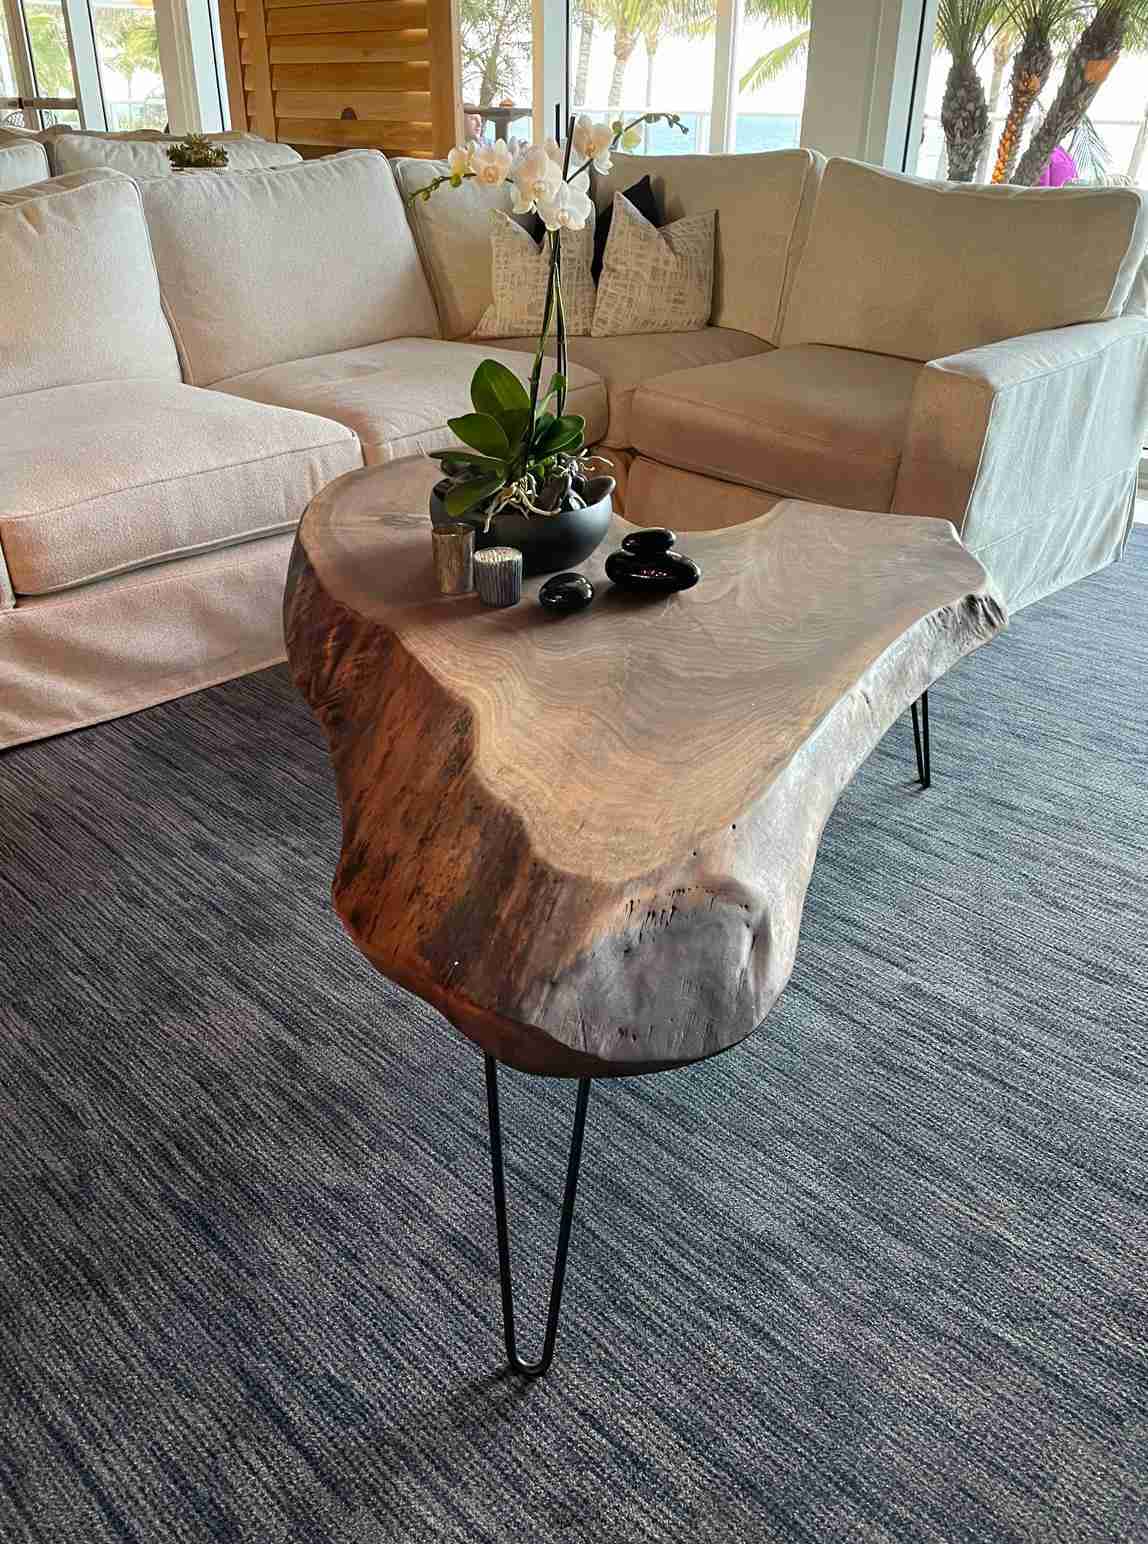 table made of wood slab